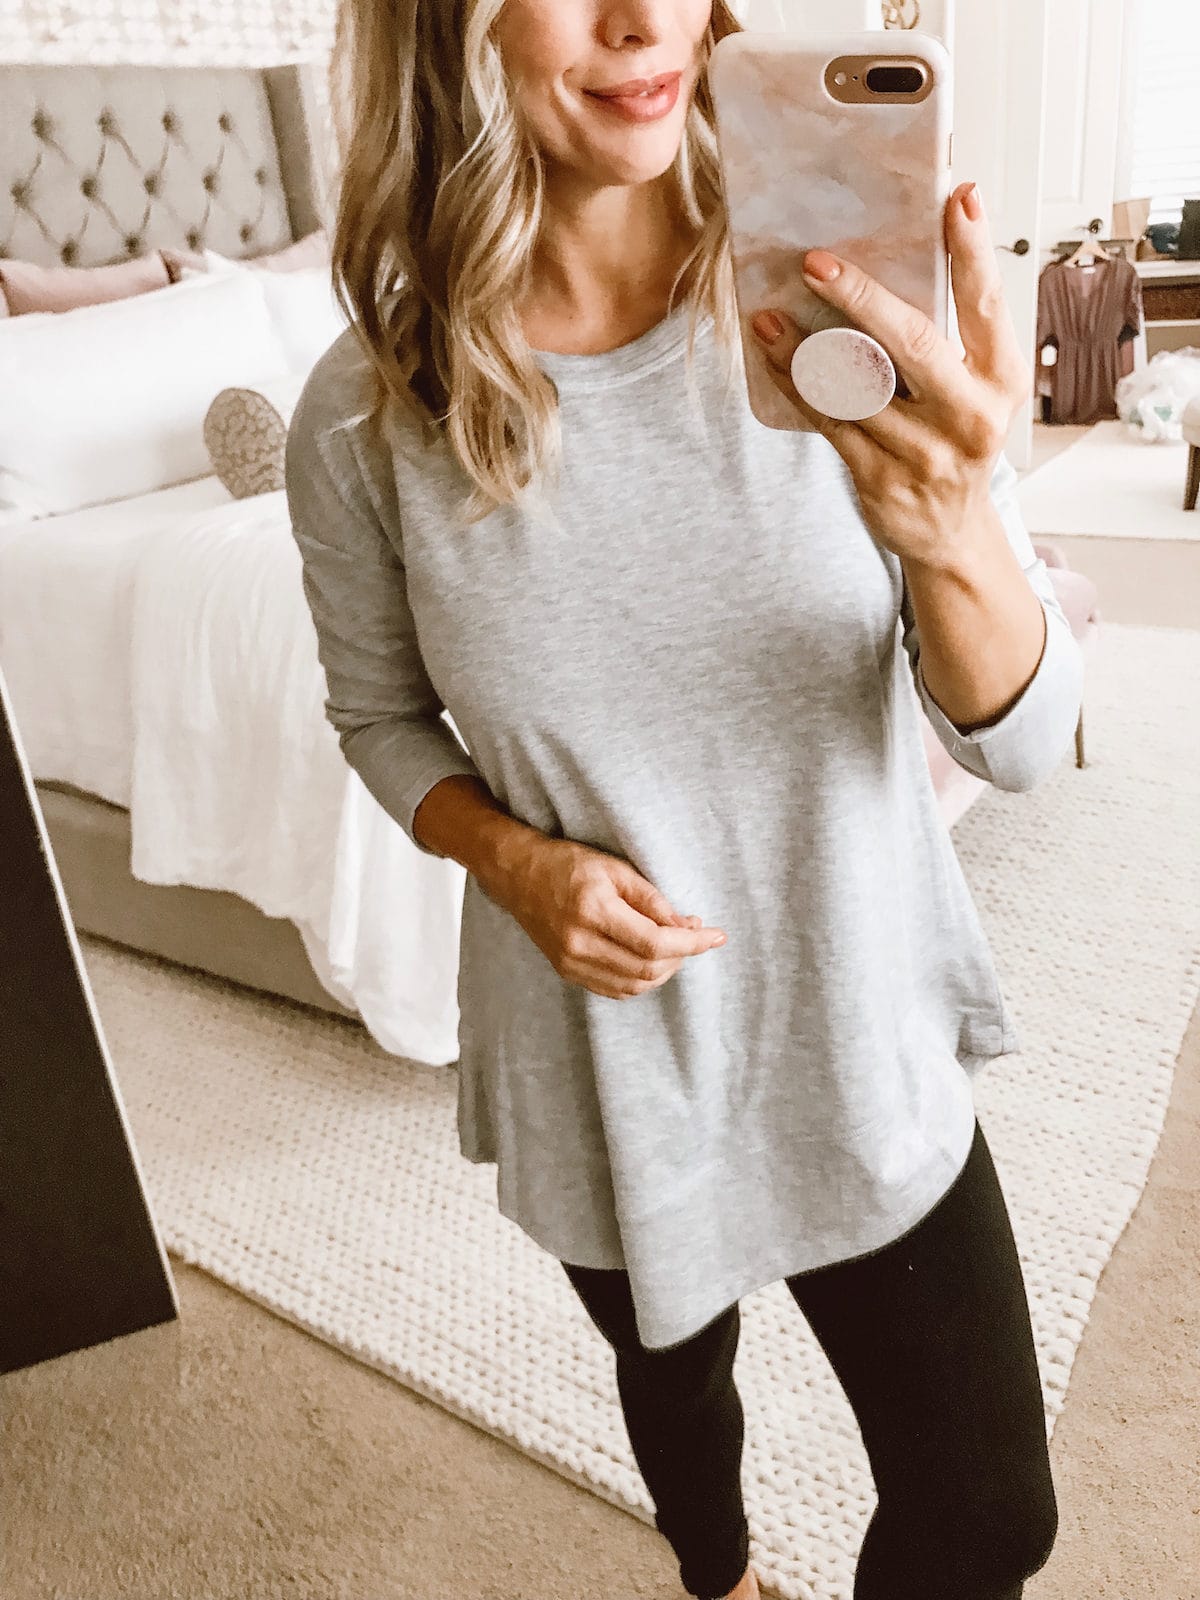 Comfy fitness outfit